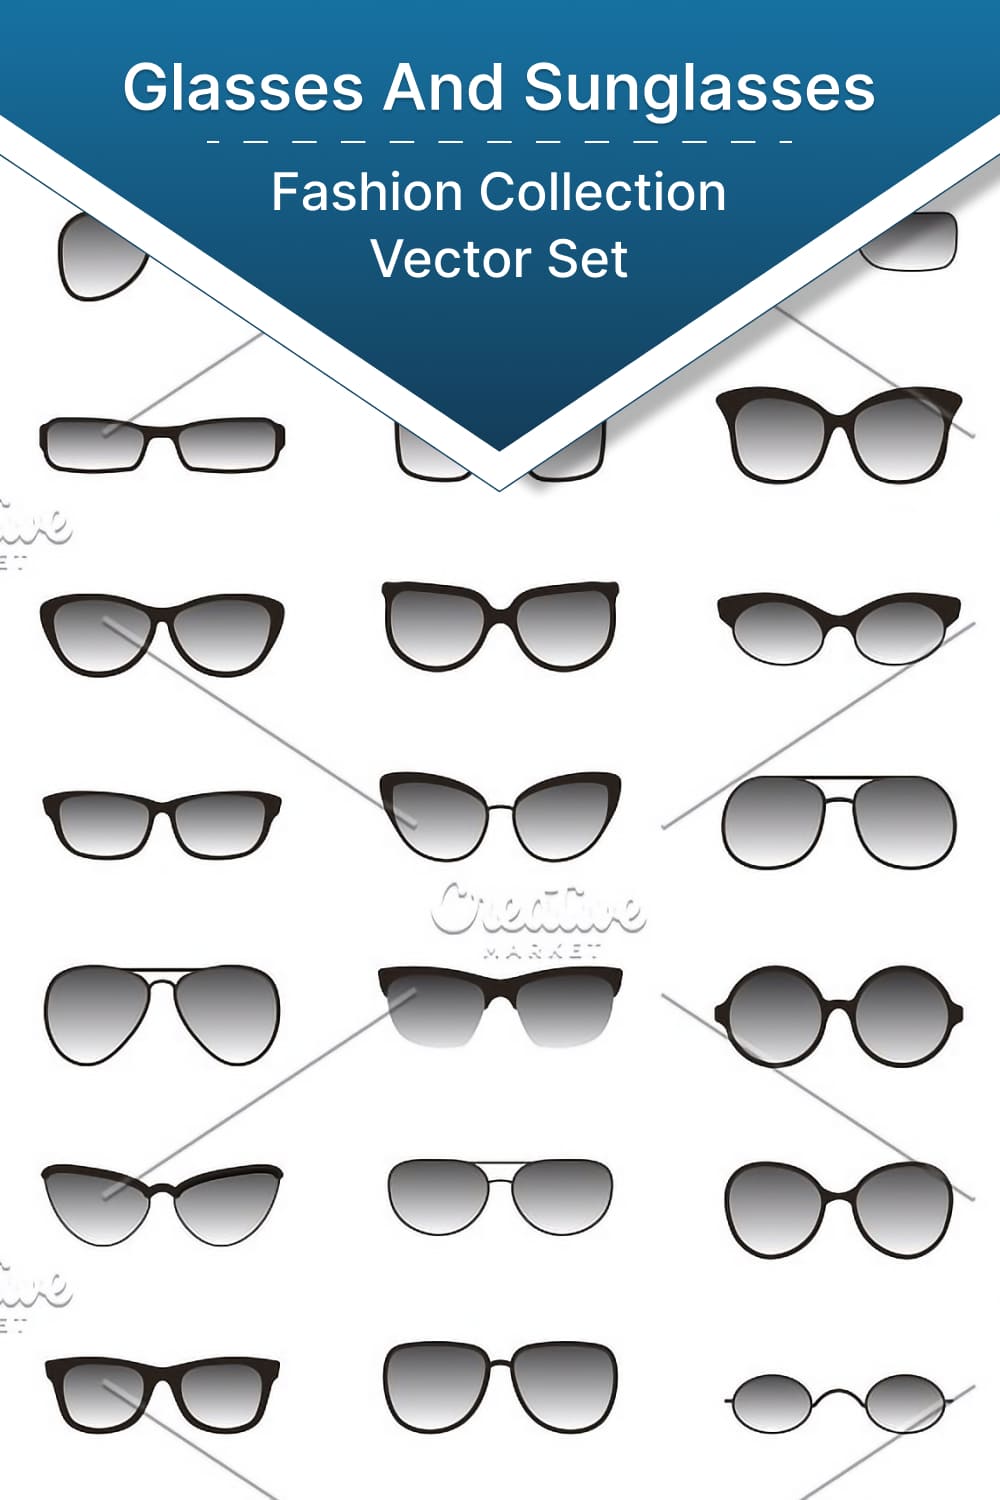 Types of glasses and sunglasses, image for pinterest.